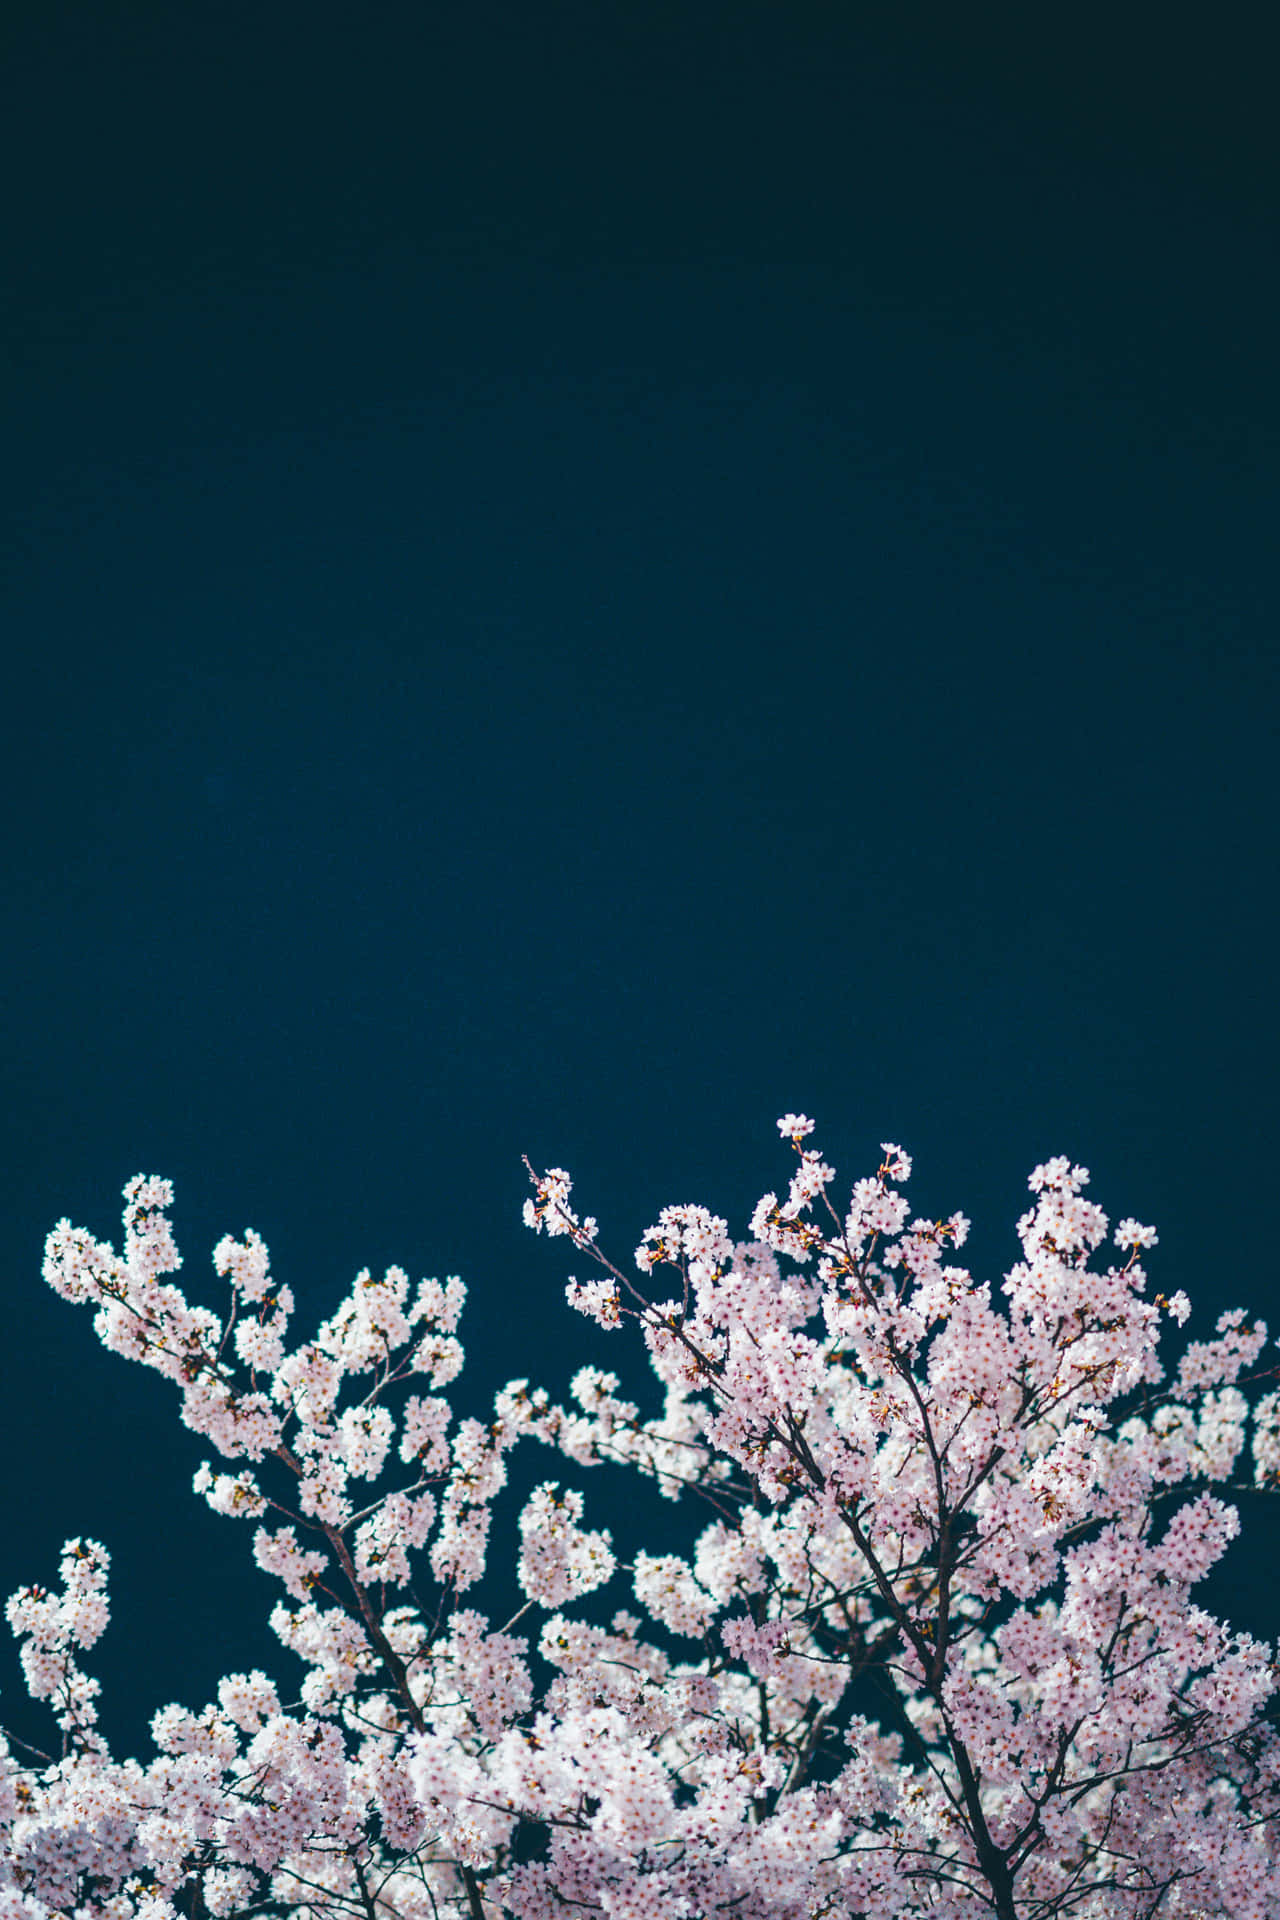 ‘Experience the Magic of a Night Cherry Blossom’ Wallpaper